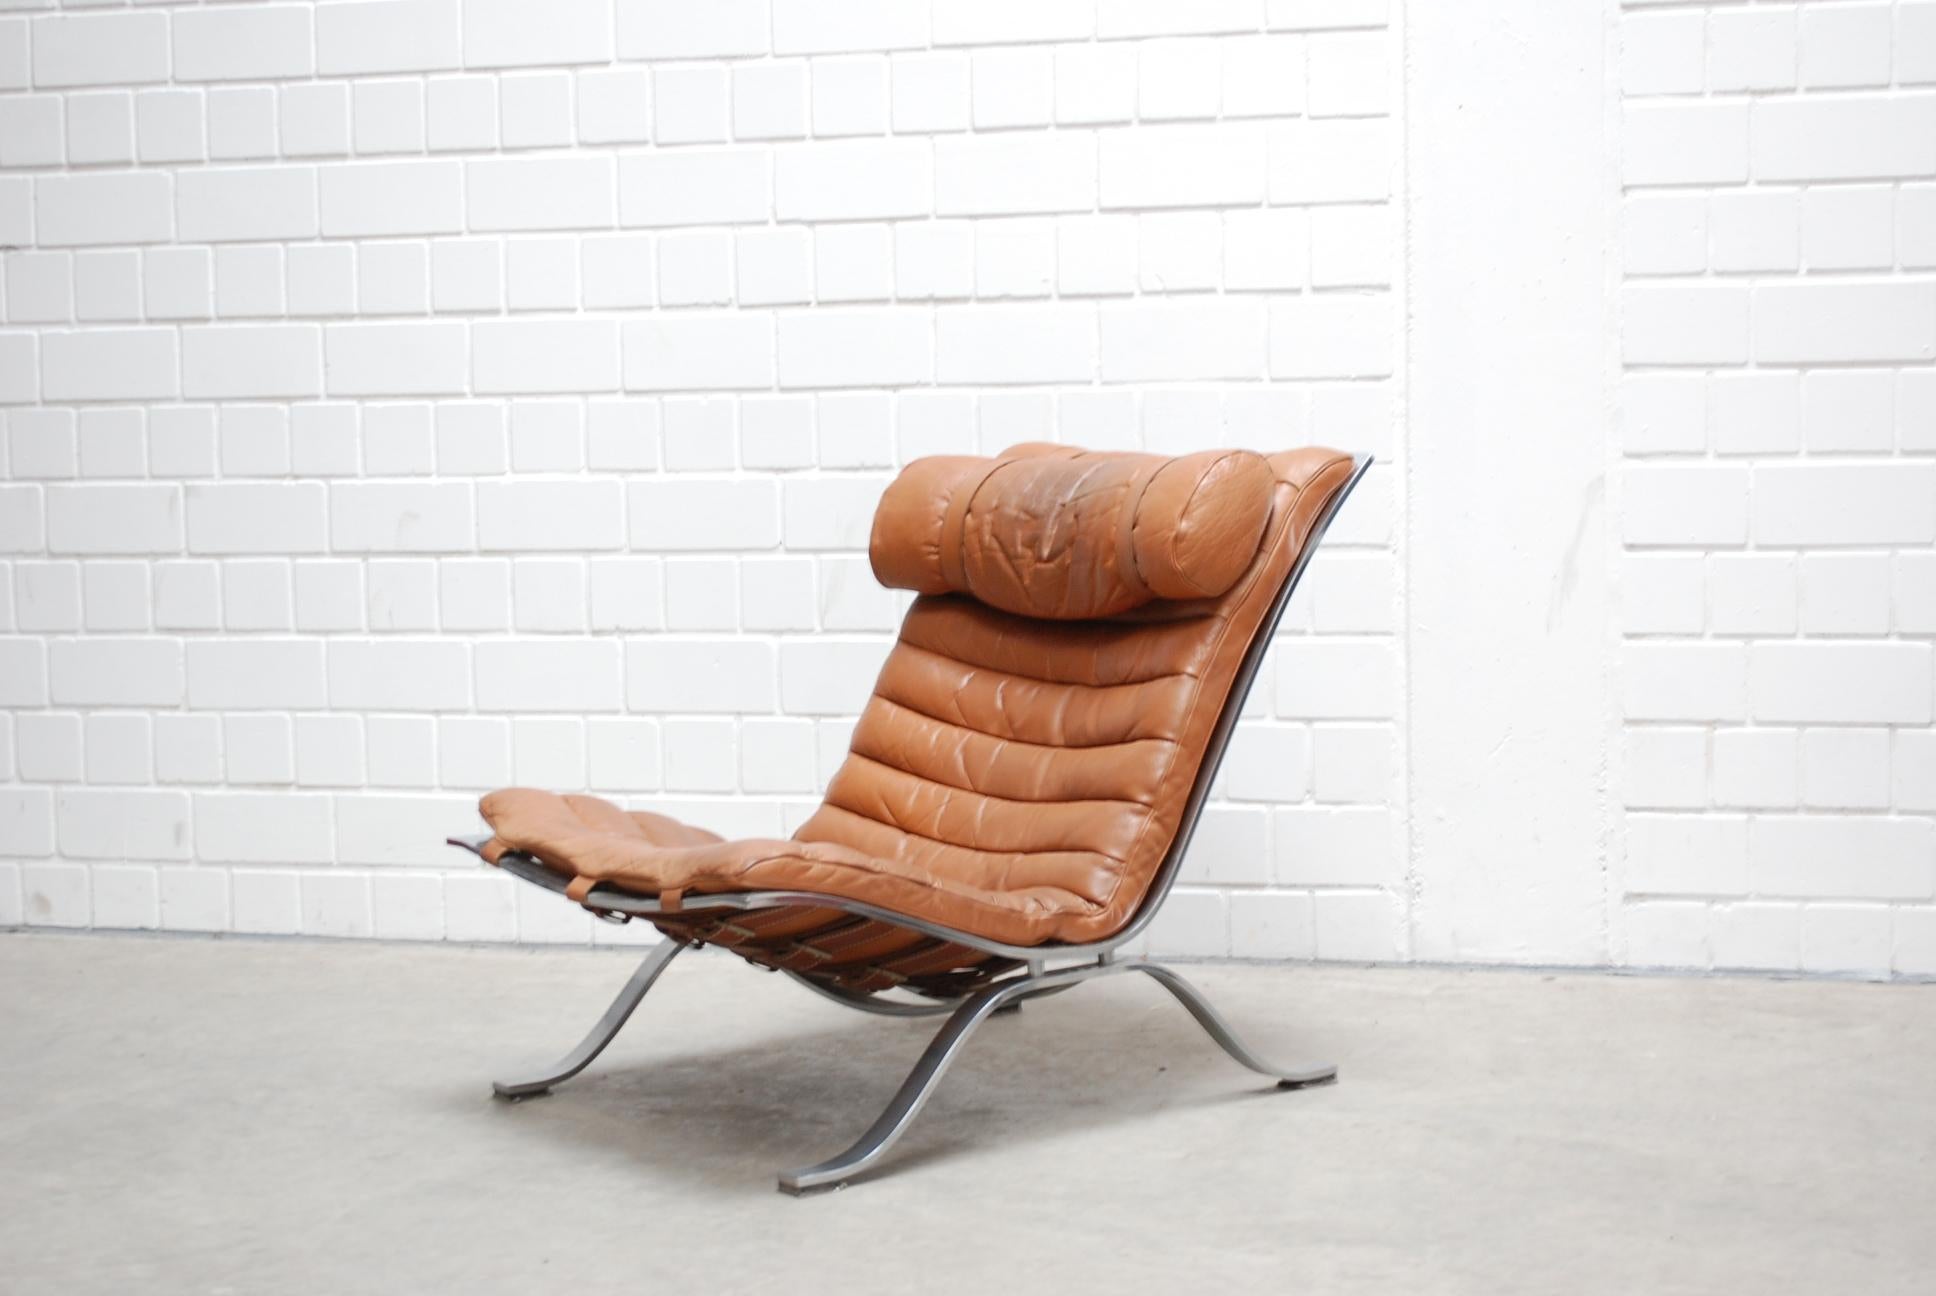 This Ari lounge chair was designed and produced by Arne Norell in Sweden.
It is made in chromed steel and cognac brandy leather upholstery.
Great leather details with belt and thick saddle leather.
A very comfortable chair.
 